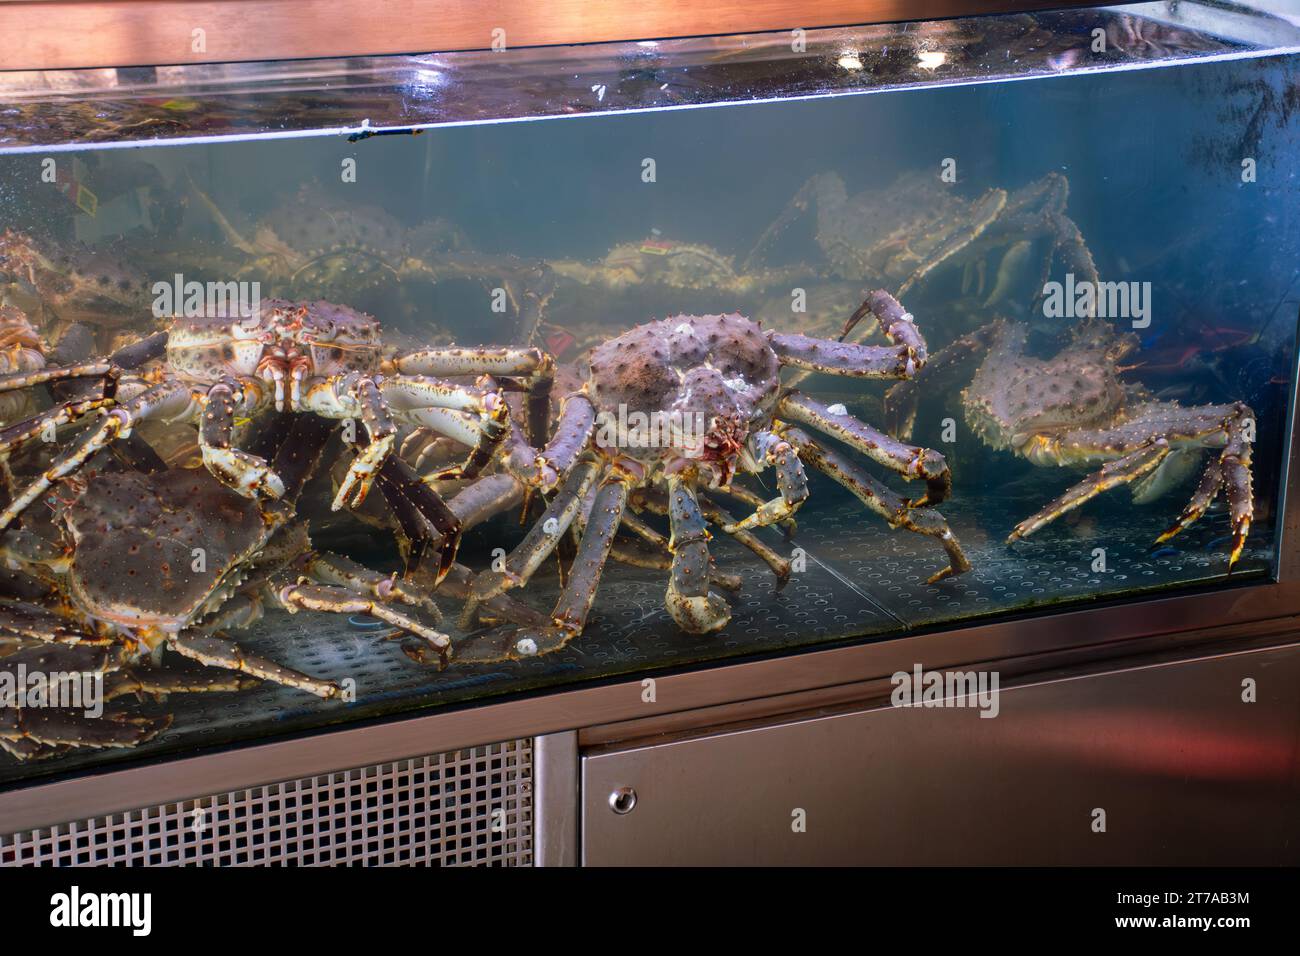 the fallen King crabs- the blacklisted Kings Stock Photo